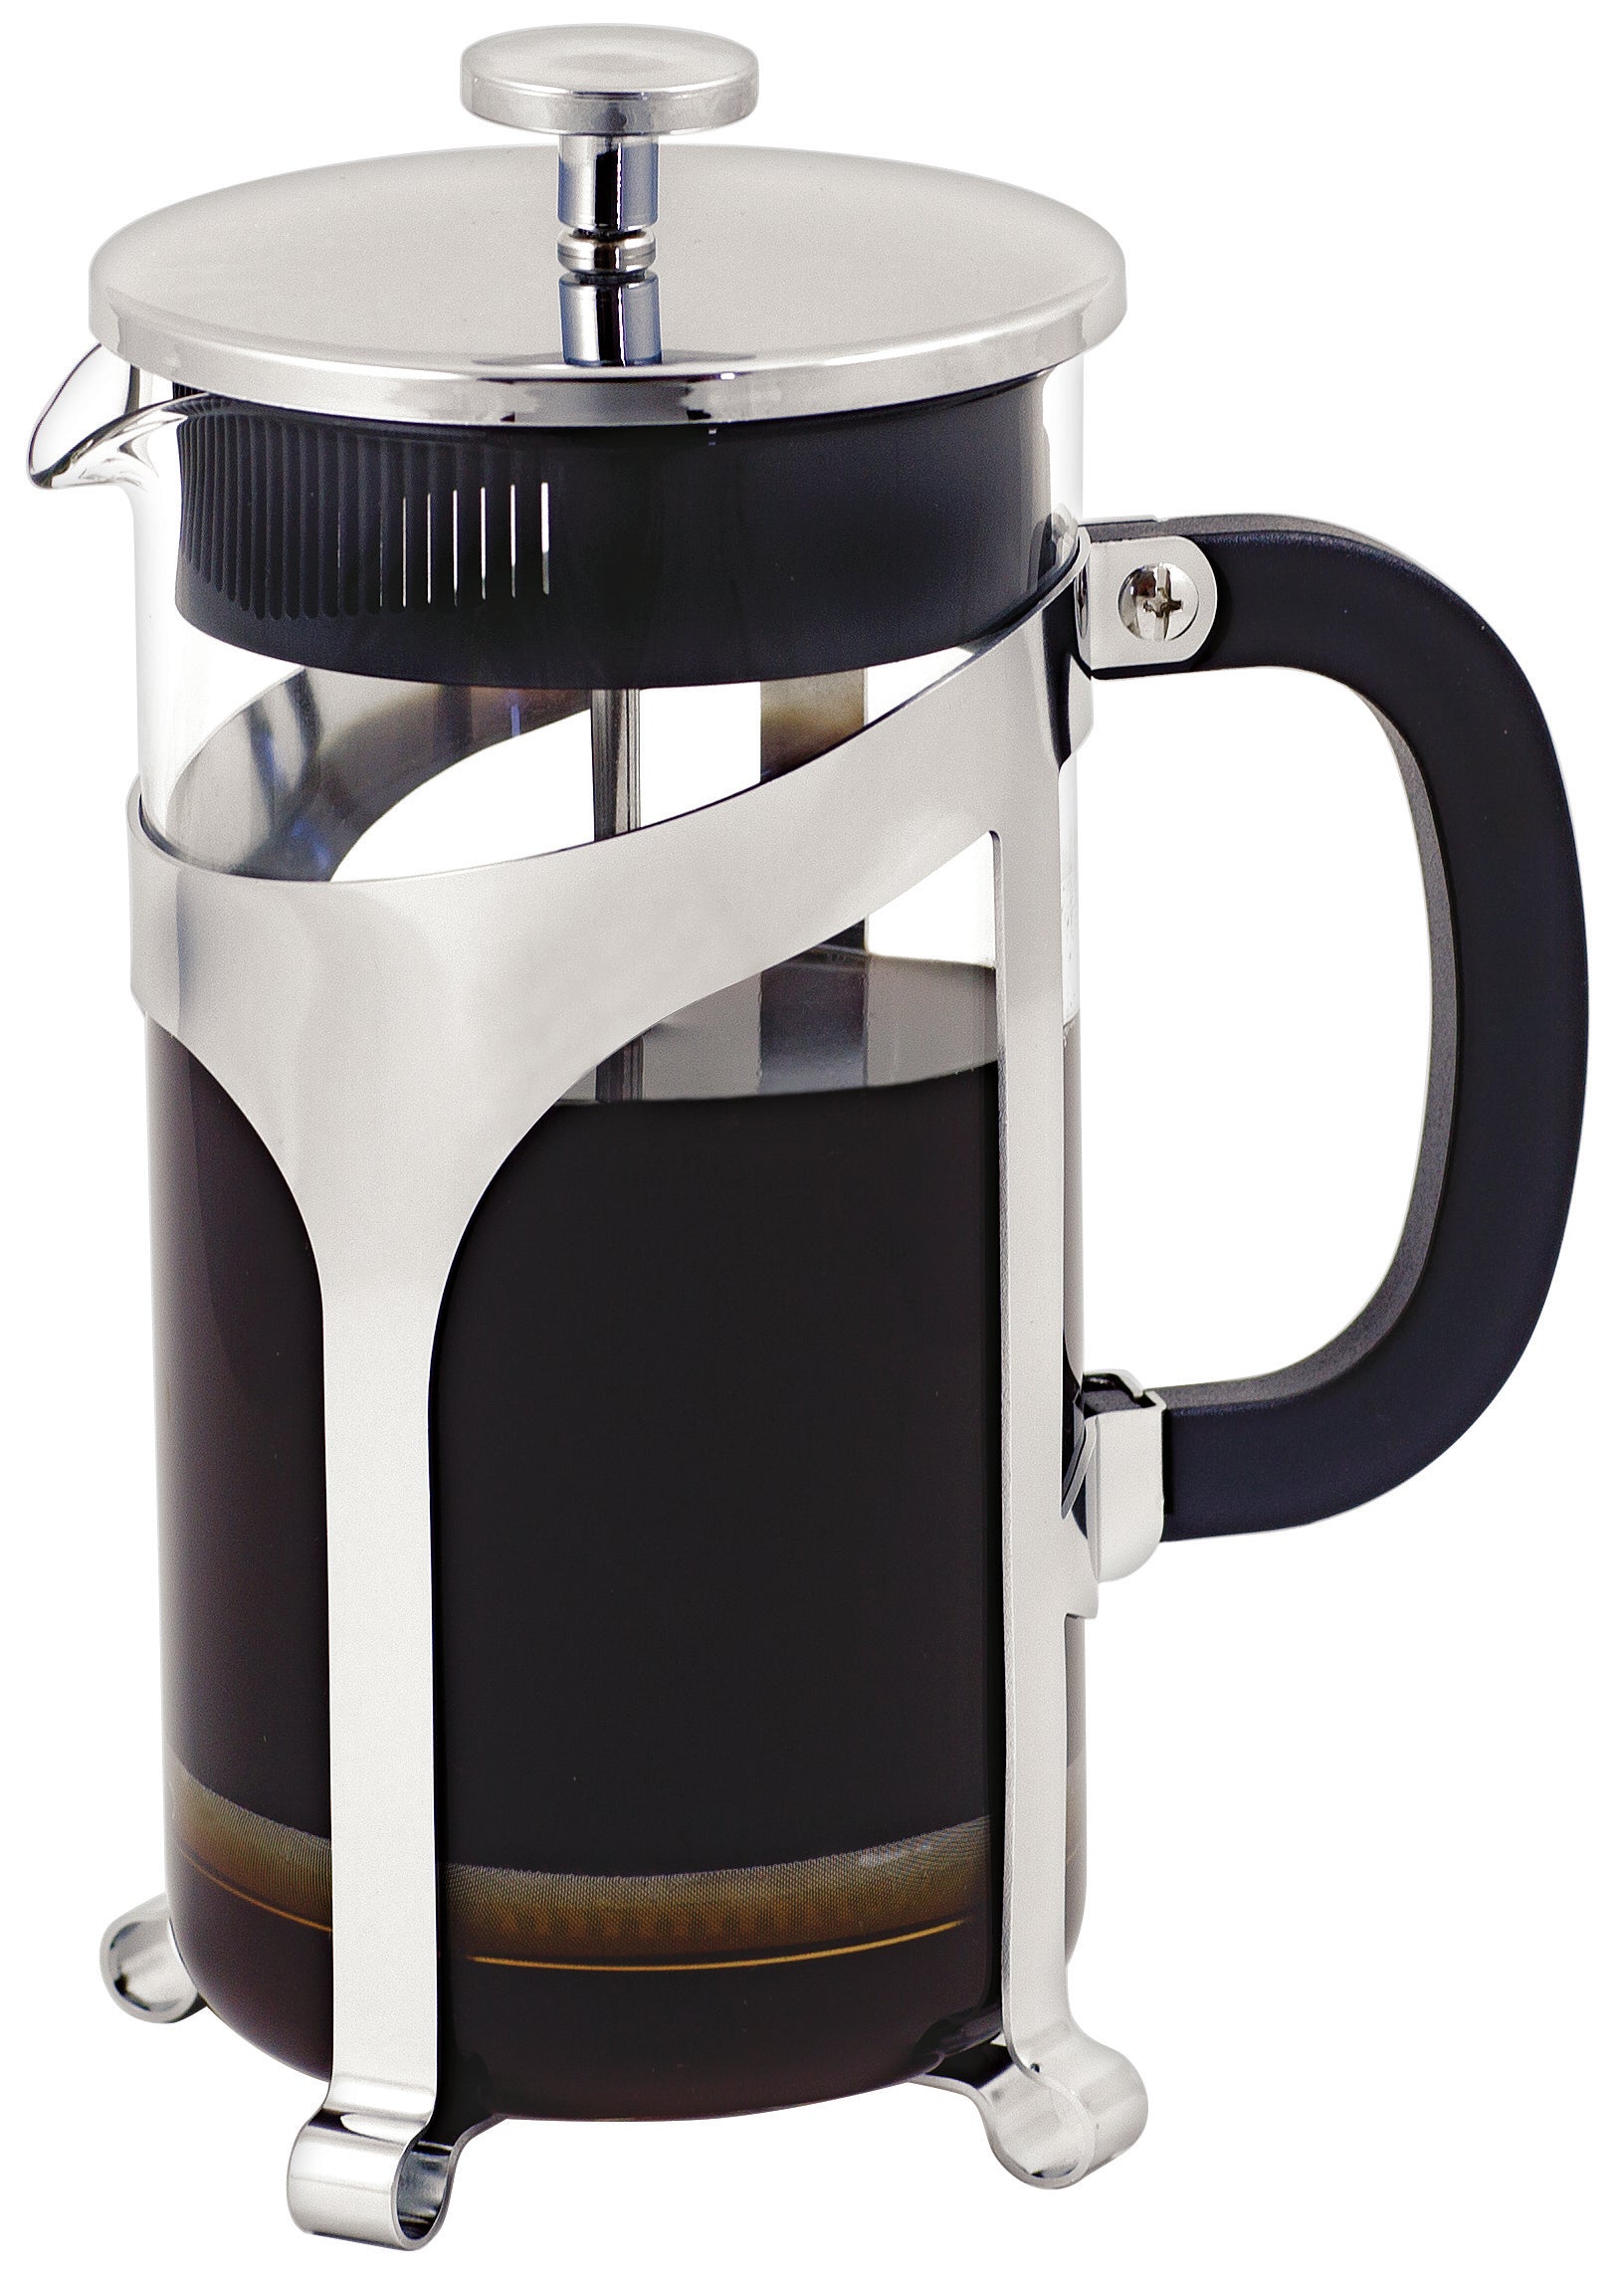 Avanti Cafe Press Glass Coffee Plunger 1 Litre / 8 Cup